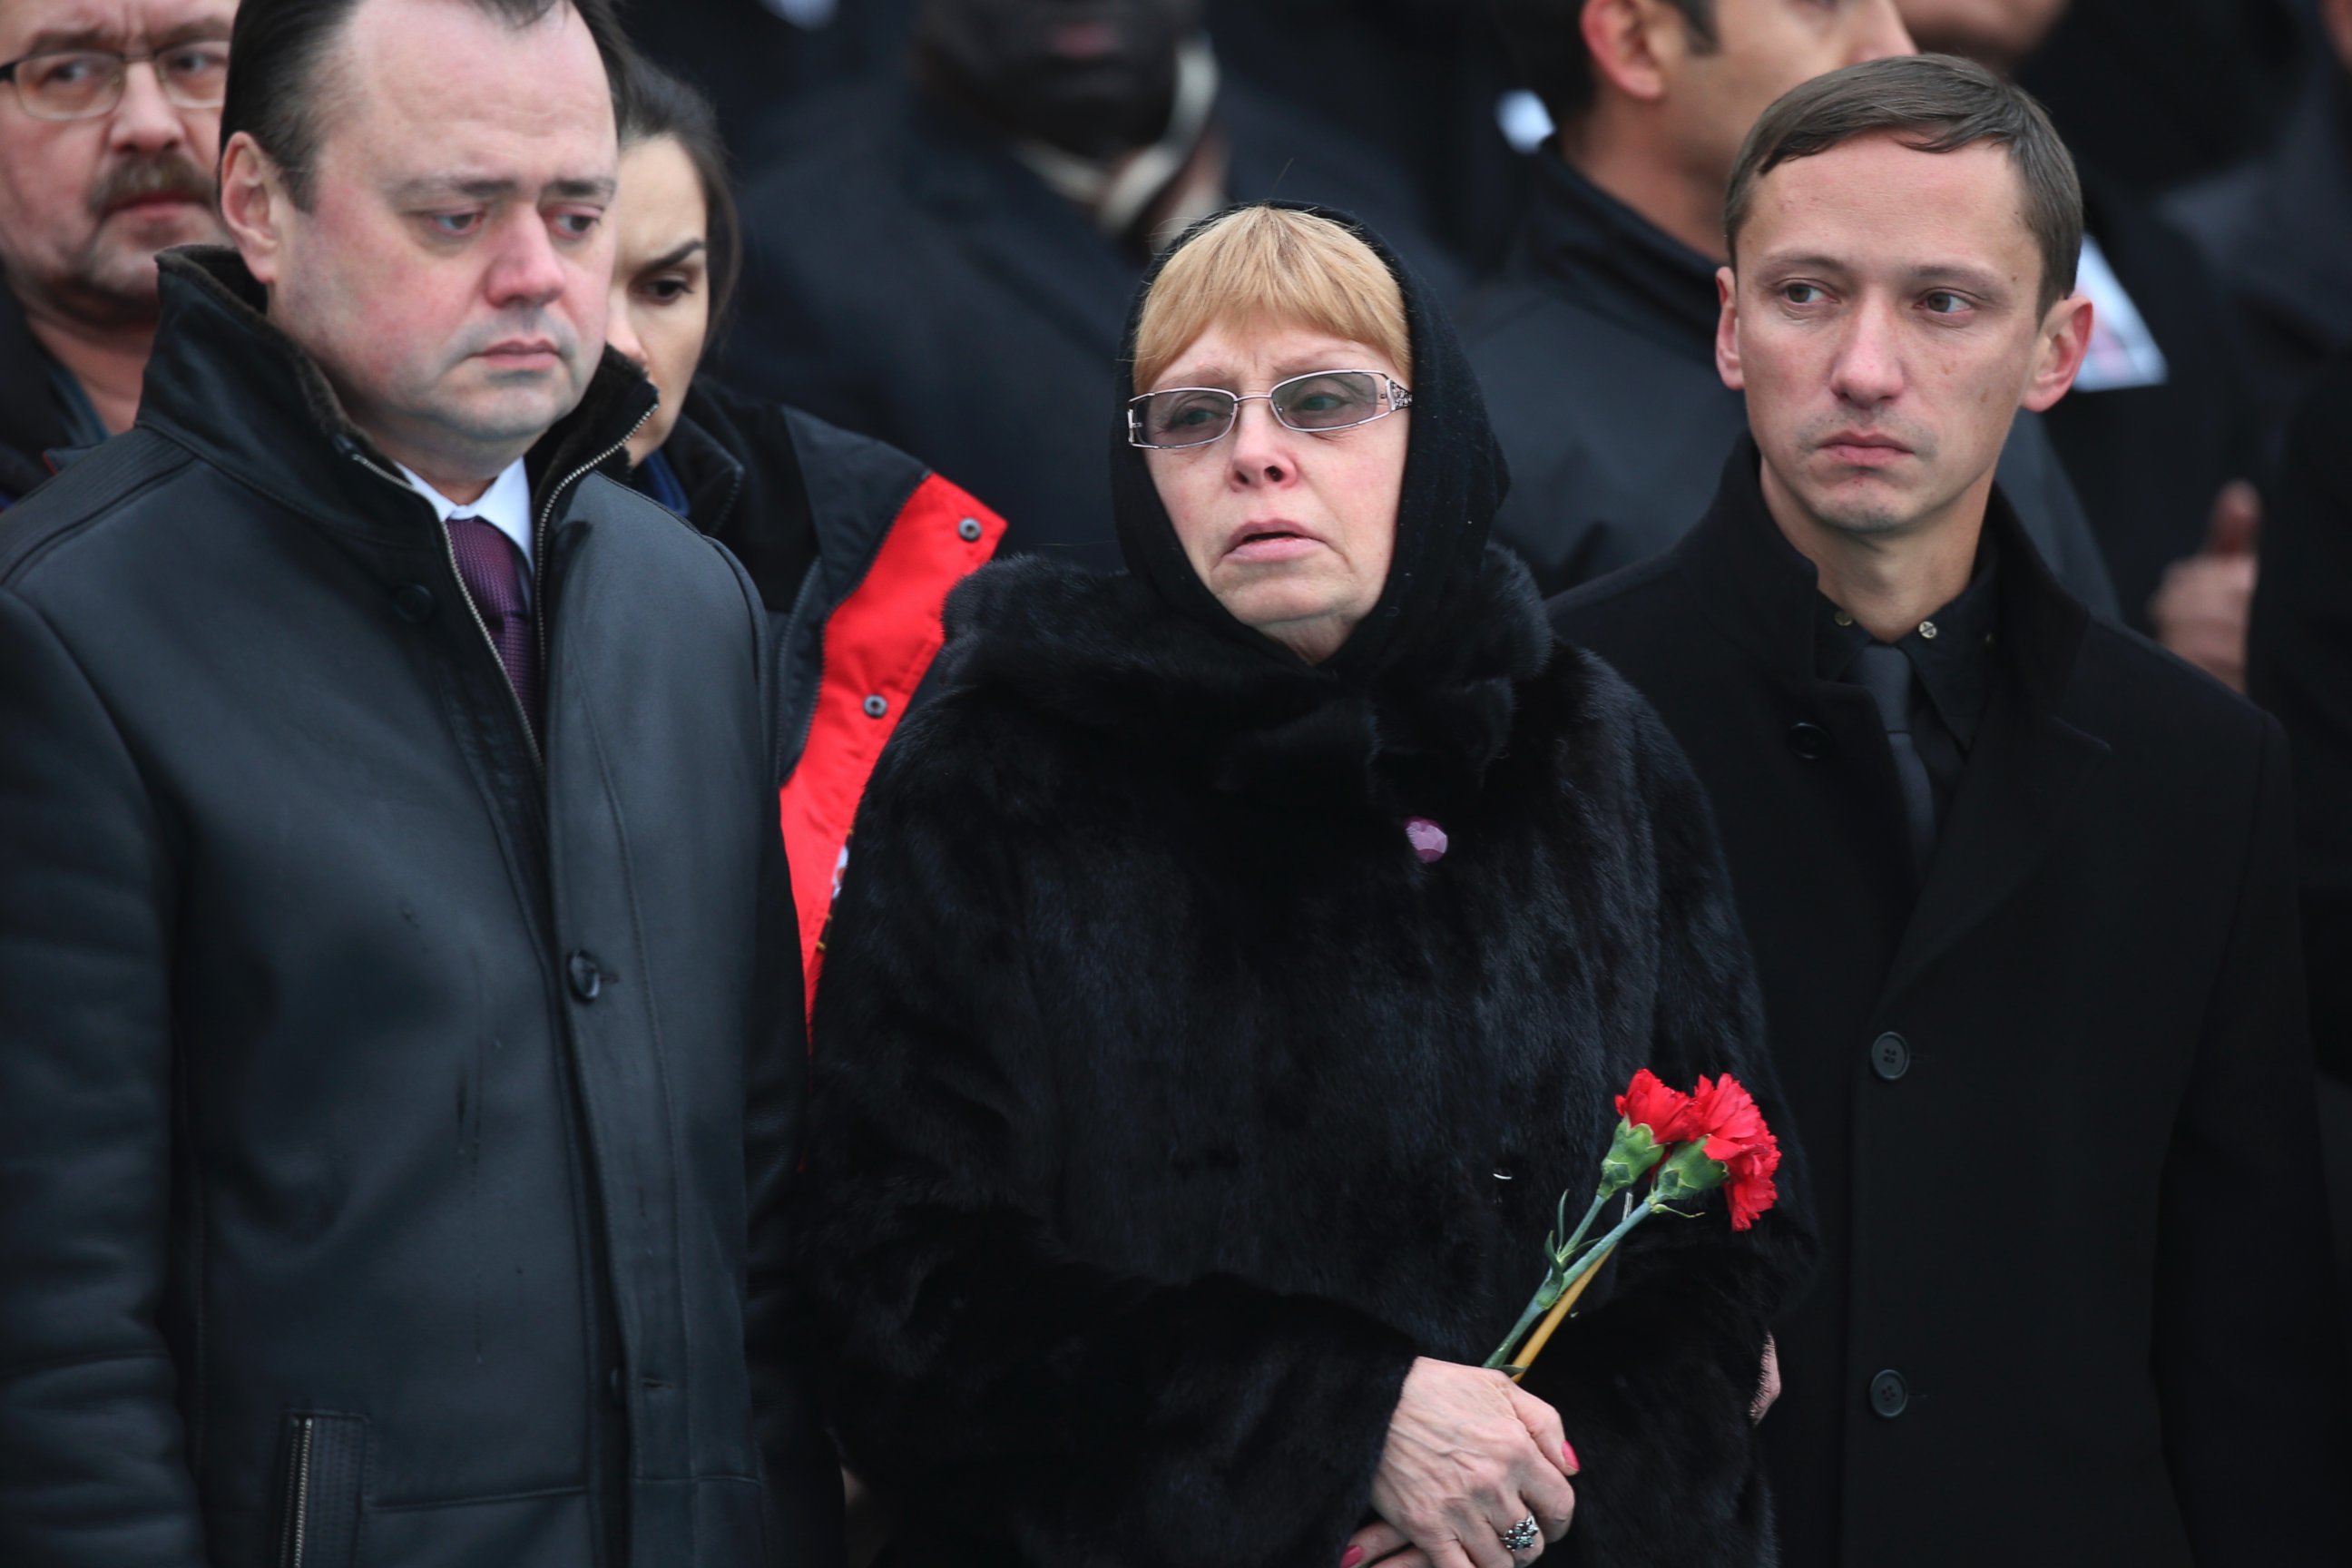 PHOTO: The wife of Russian Ambassador to Turkey, Andrei Karlov, who was assassinated Monday, stands during a ceremony at the airport in Ankara, Turkey, Dec. 20, 2016.